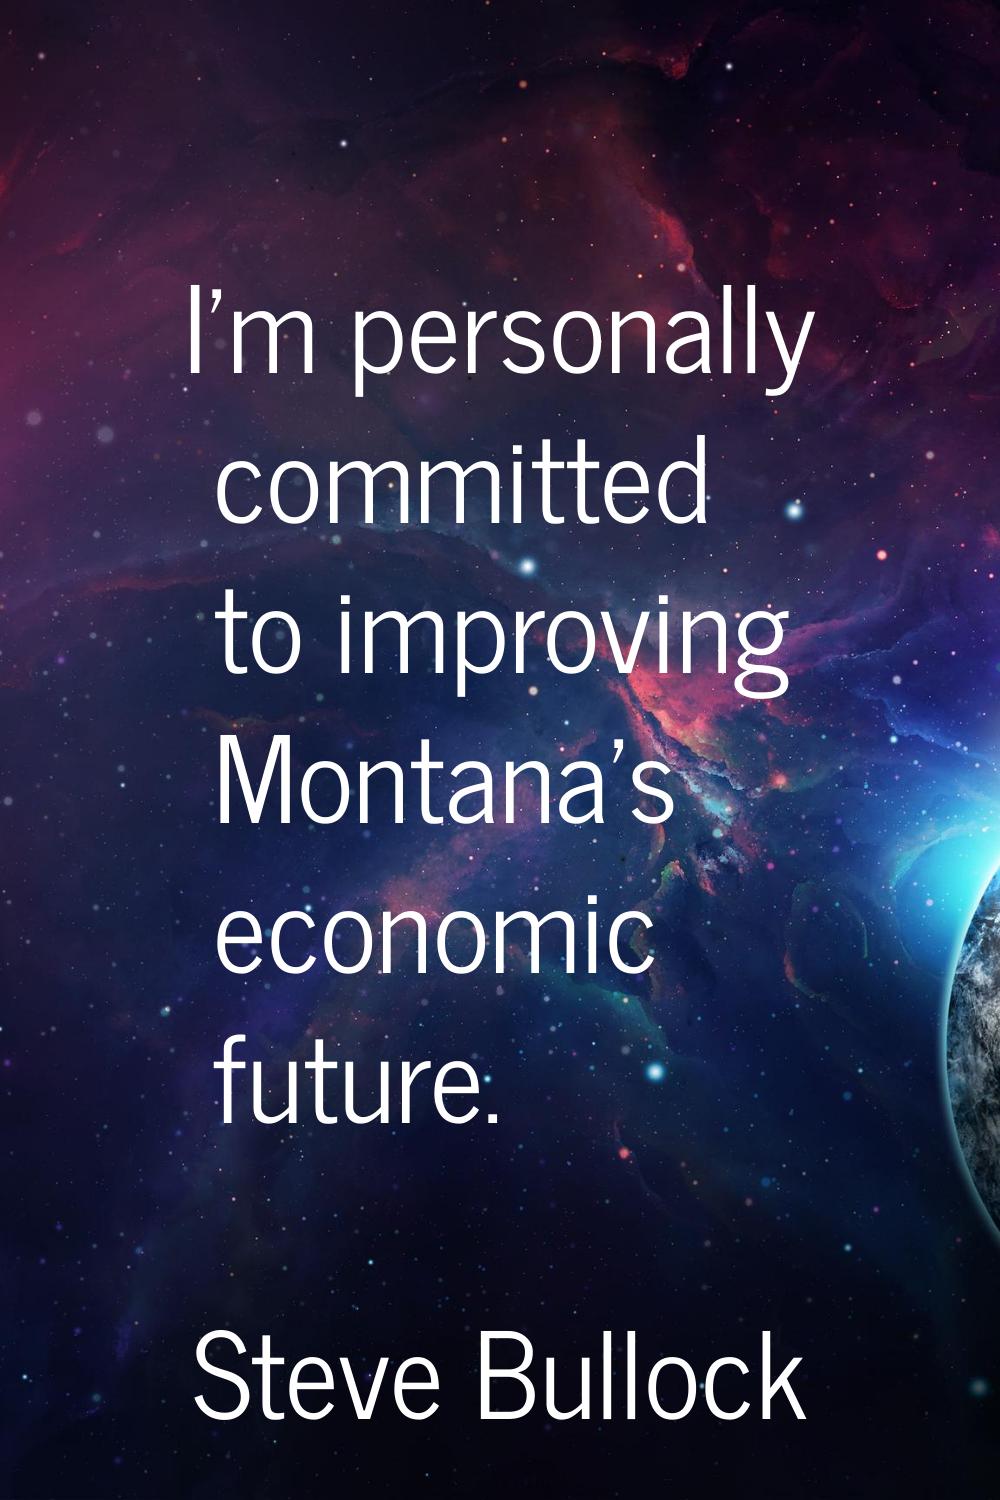 I'm personally committed to improving Montana's economic future.